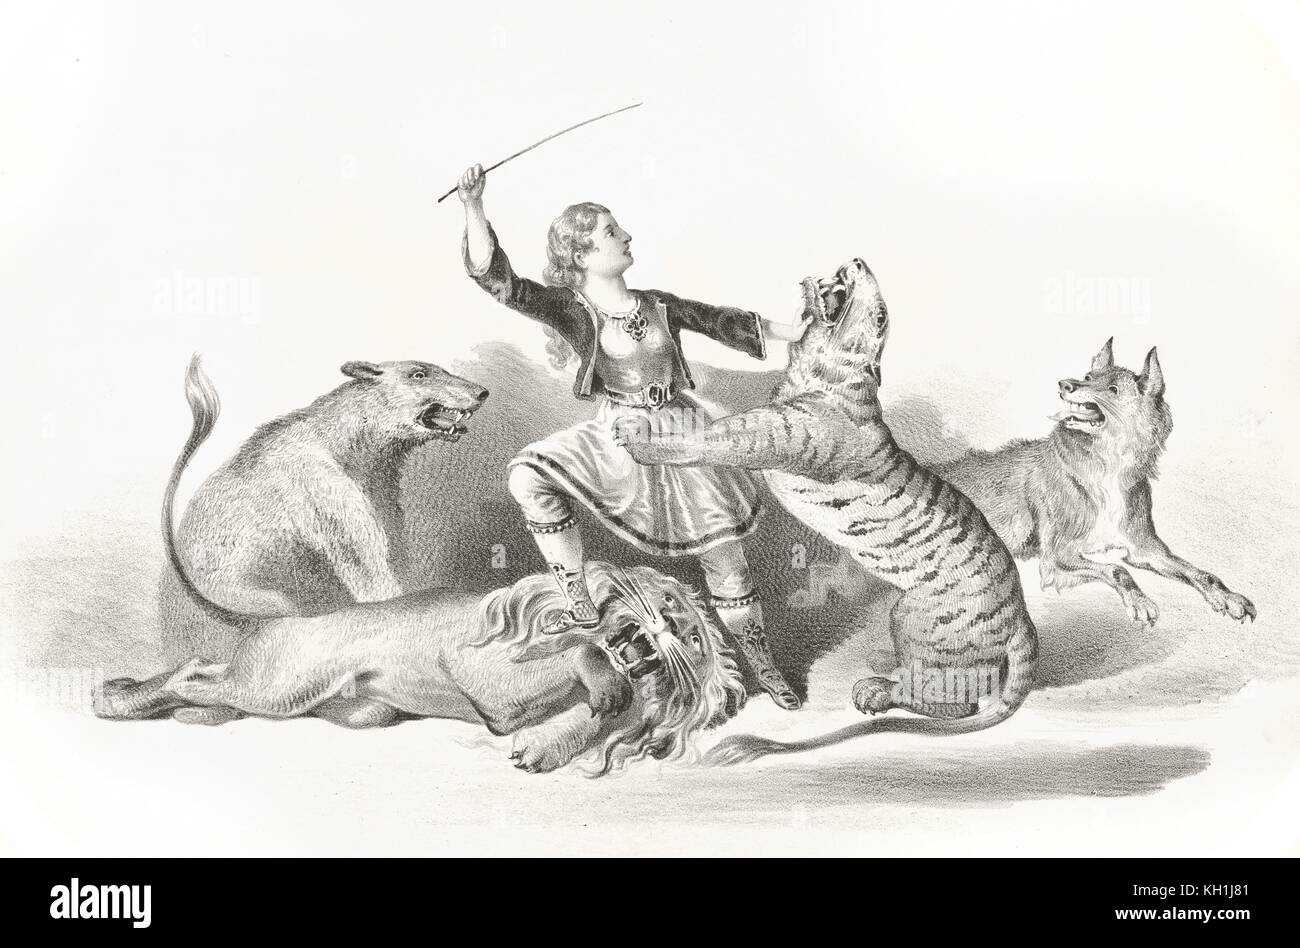 Old illustration of a girl lion tamer. By unidentified author, publ. in Cincinnati, 1872 Stock Photo